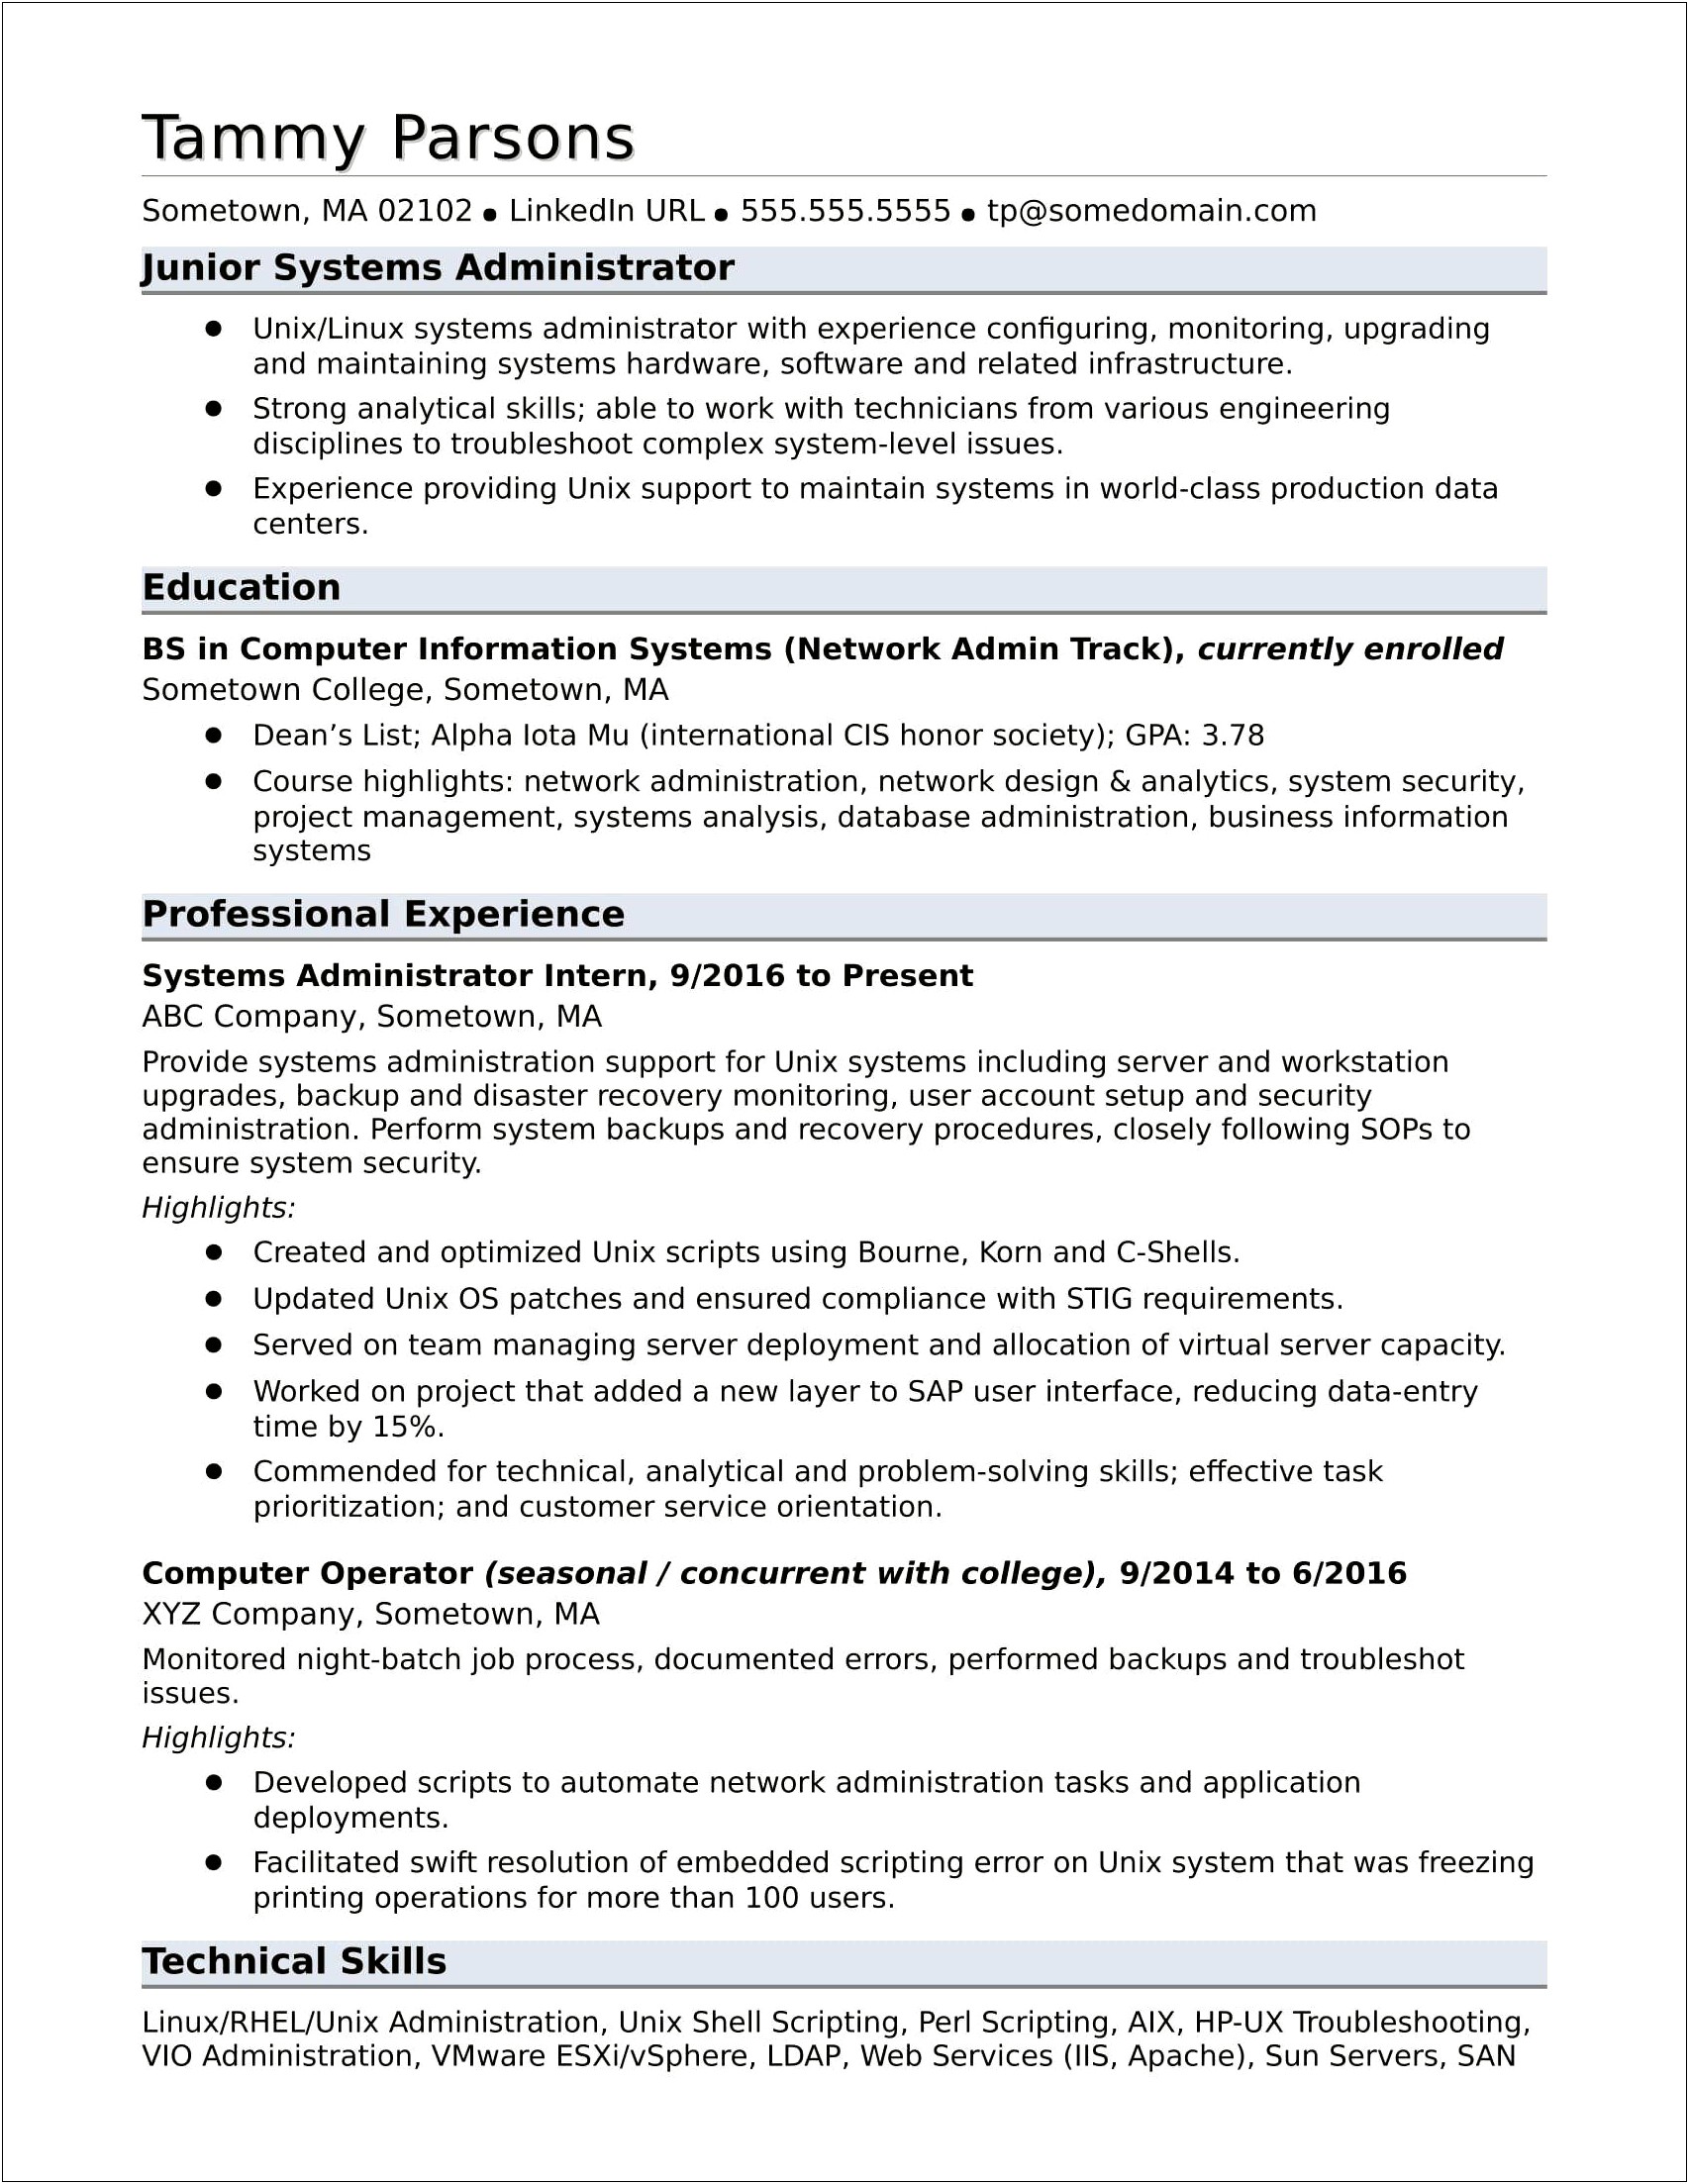 Salesforce Admin In College Experience Resume